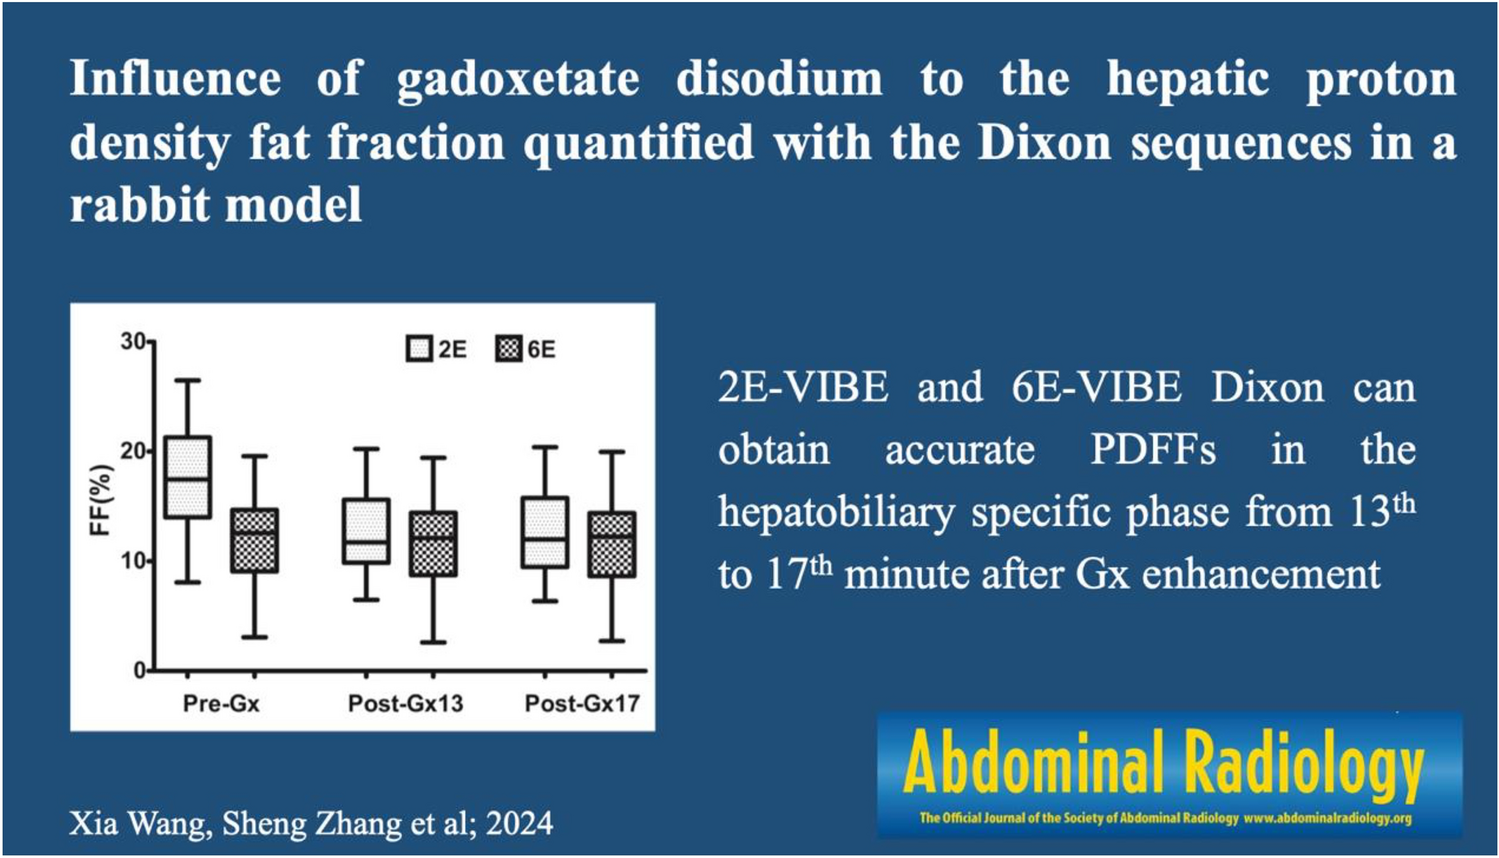 Influence of Gadoxetate disodium to the hepatic proton density fat fraction quantified with the Dixon sequences in a rabbit model